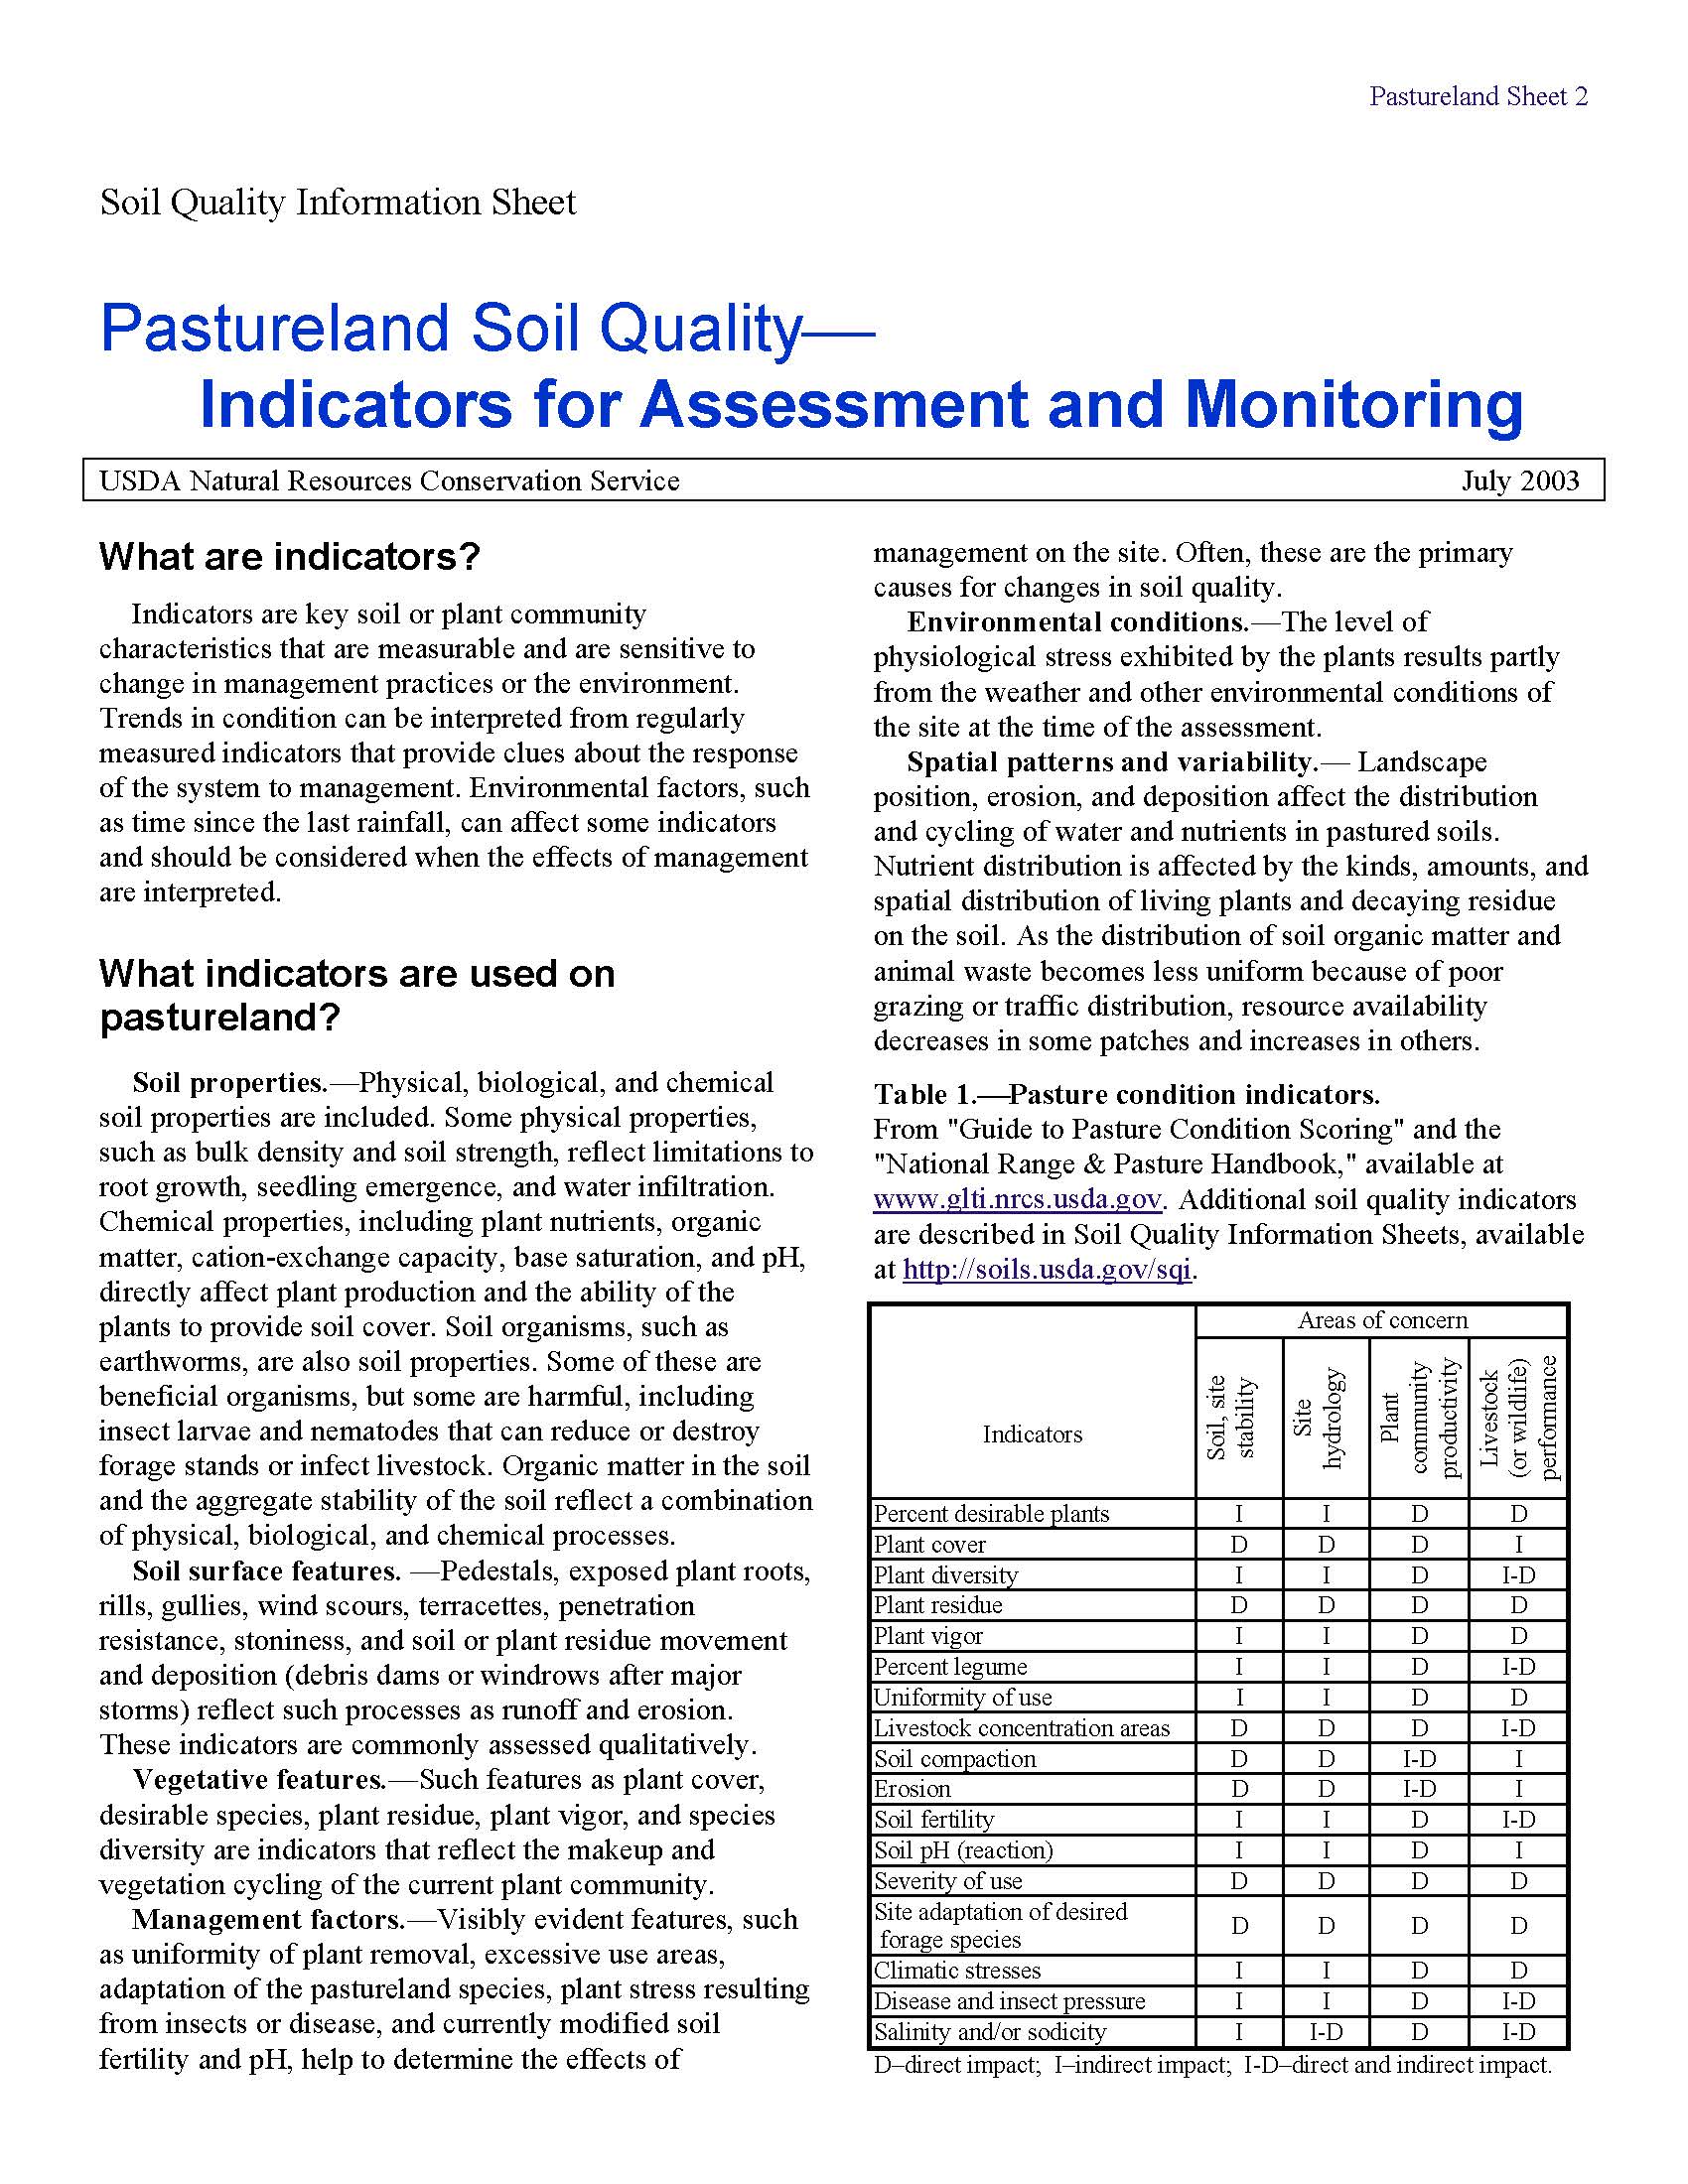 SQ-Pastureland Soil Quality-Indicators for Assessment and Monitoring